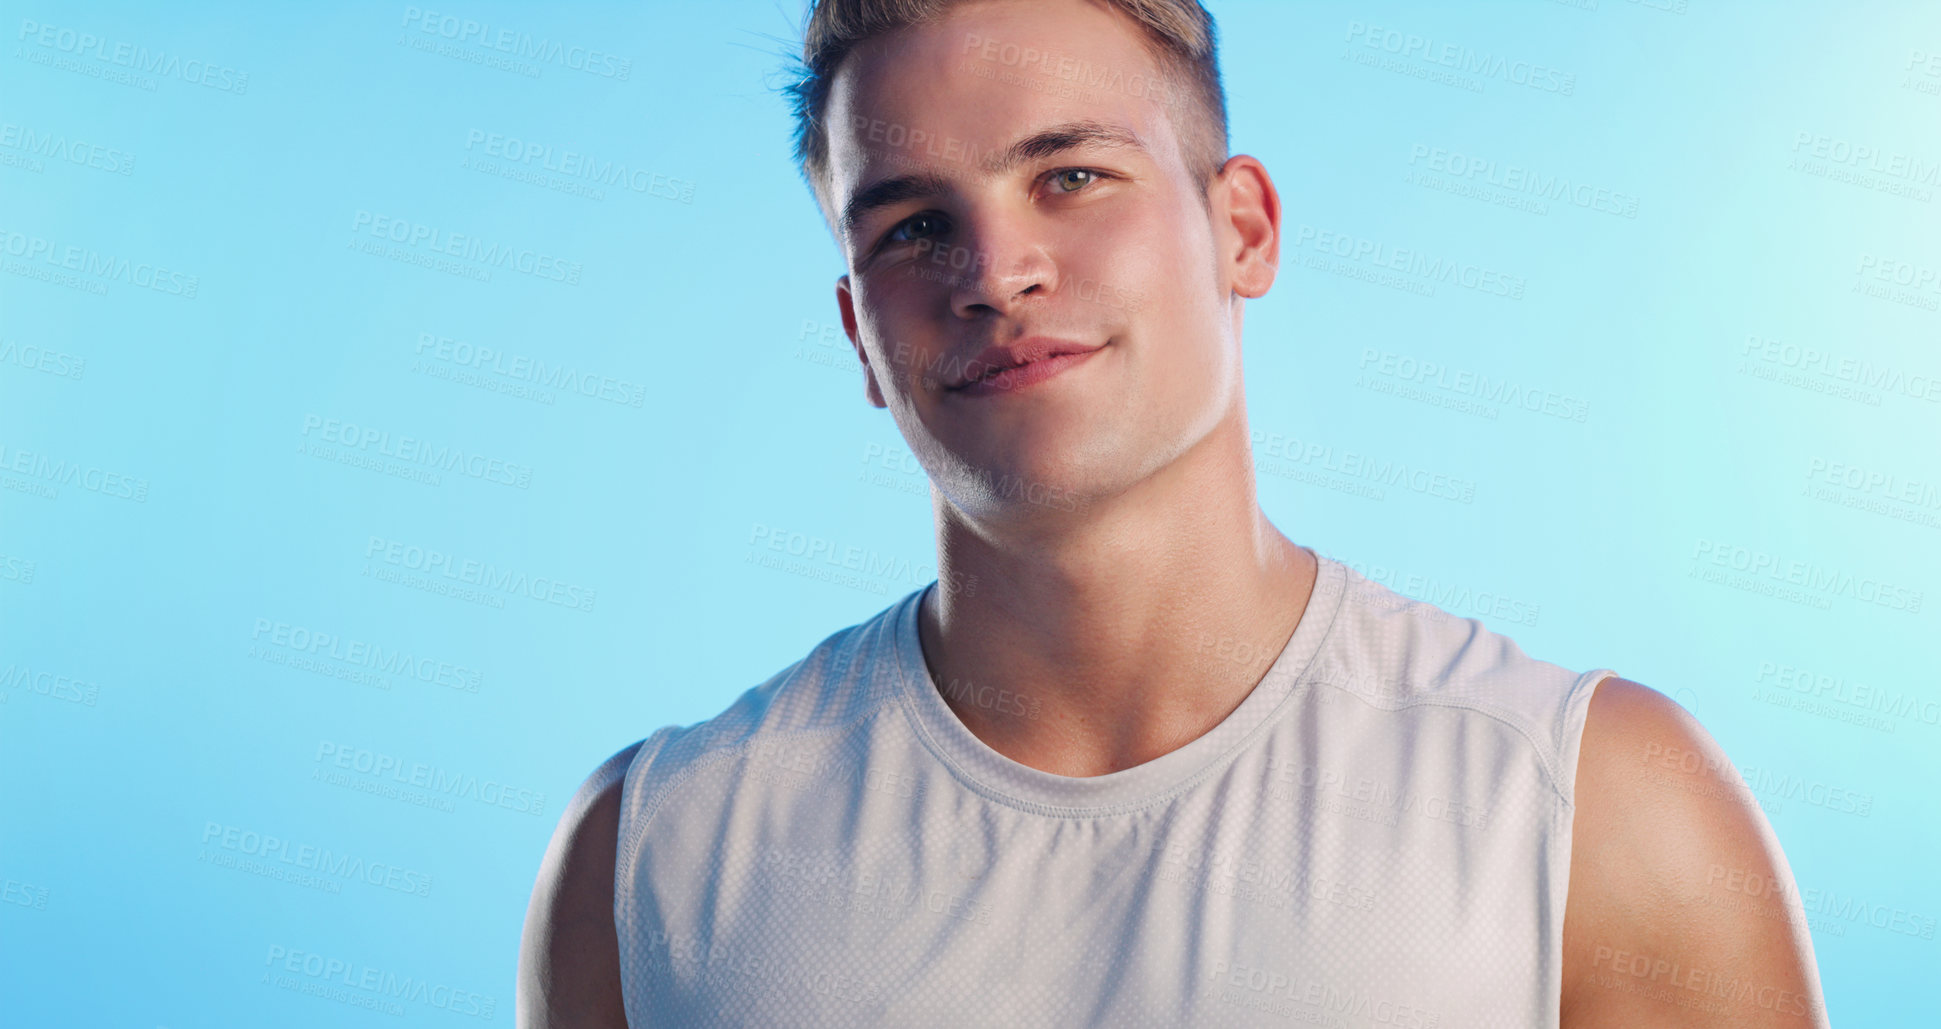 Buy stock photo Studio portrait of a handsome young man posing against a blue background